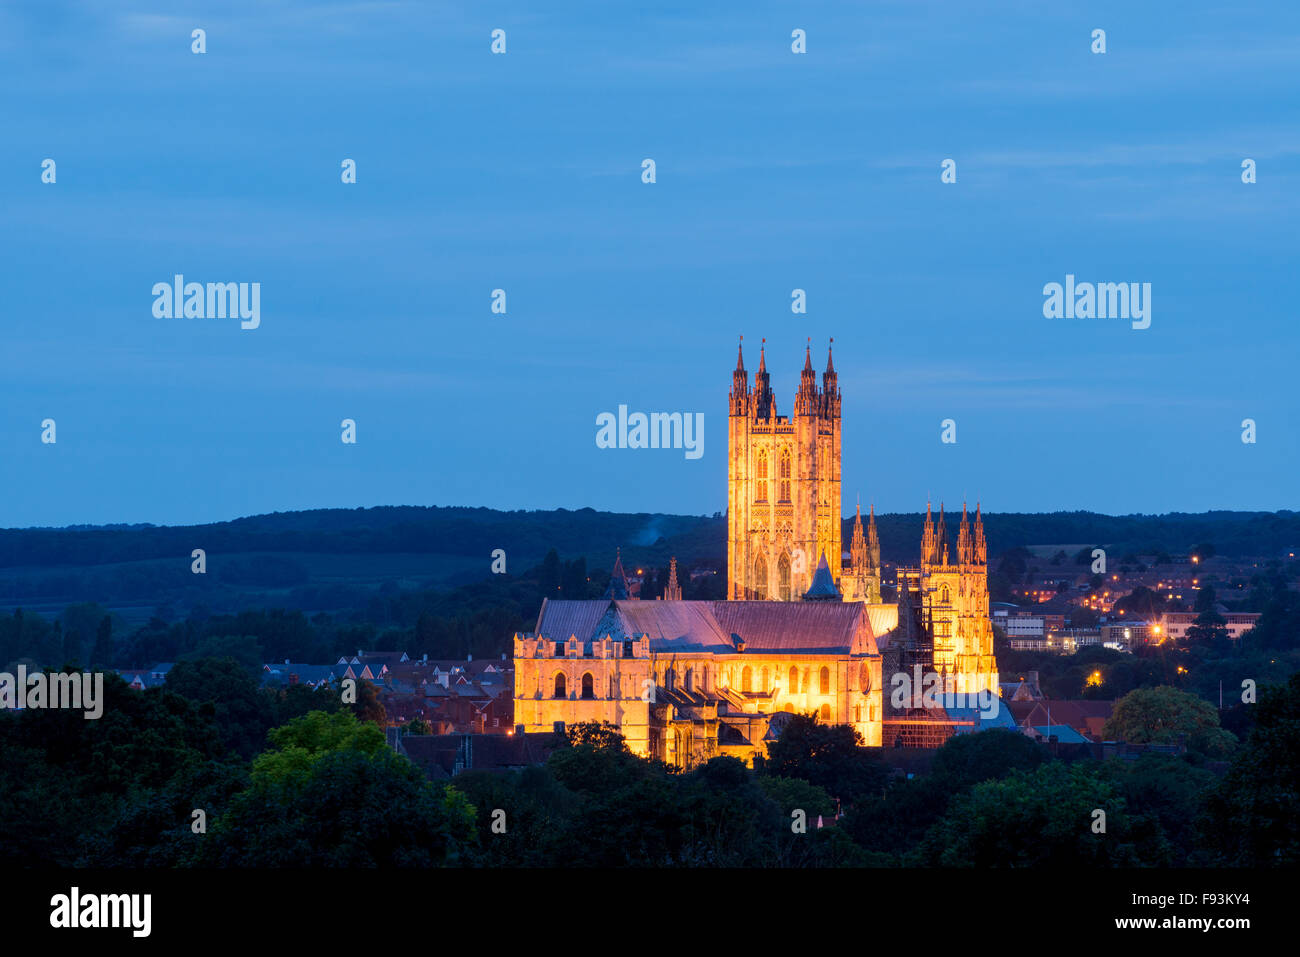 A view of Canterbury Cathedral from Chaucer road, illuminated at dusk. Stock Photo